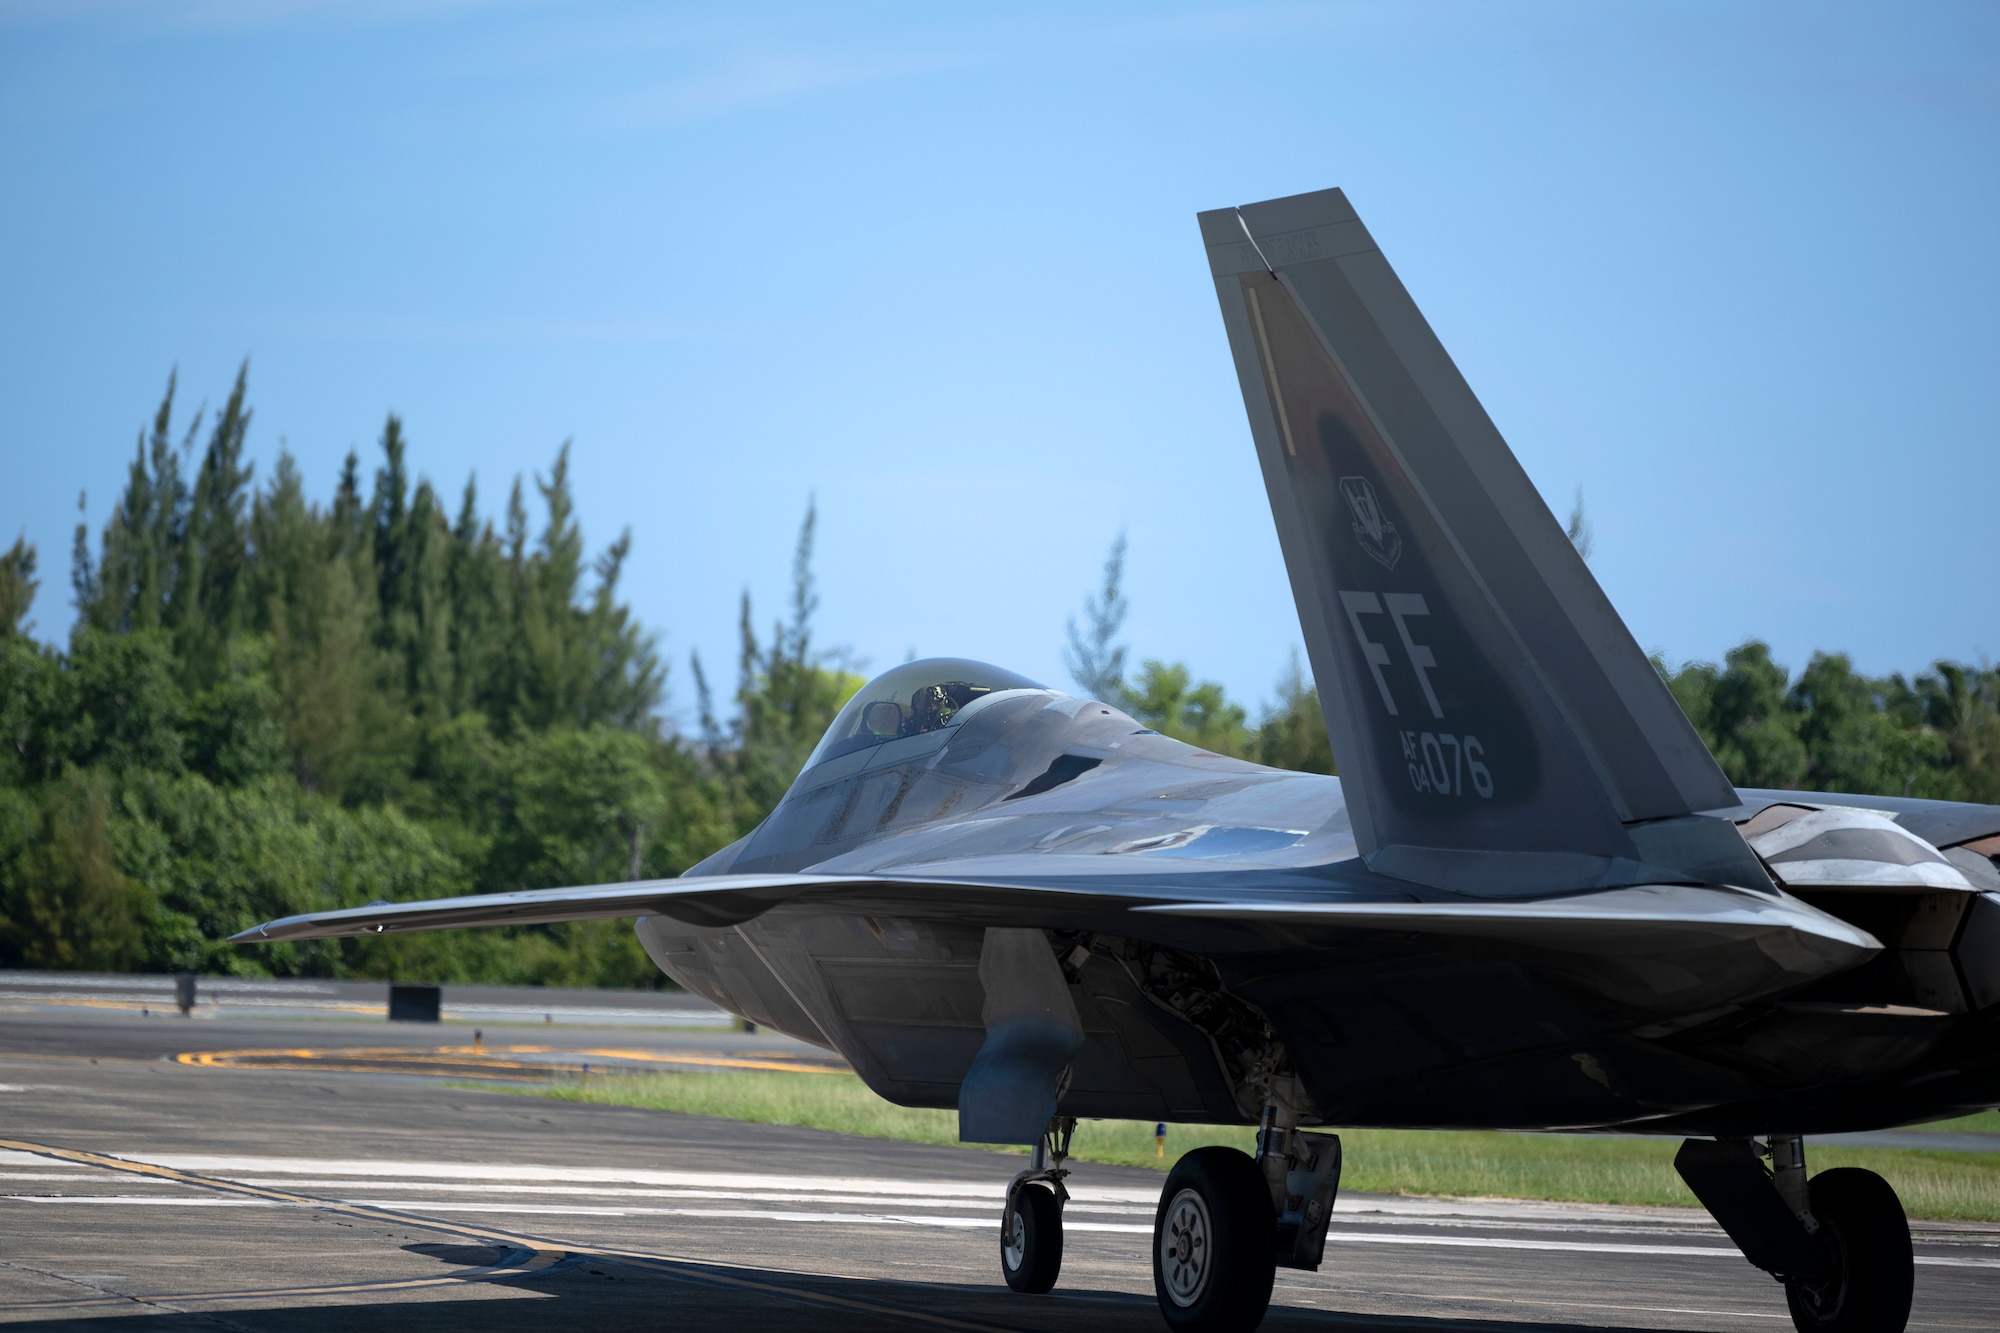 An F-22 Raptor assigned to the 192nd Wing, Virginia Air National Guard, departs the 156th Wing airfield during Operation Hoodoo Sea at Muñiz Air National Guard Base, Carolina, Puerto Rico, May 4, 2023. Operation Hoodoo Sea is a multi-unit training exercise where participant units conduct agile combat training in the coastal southeast of the U.S. to test agile communications innovations, portable aerospace ground equipment, aircraft concealment hangars and survival kits. (U.S. Air National Guard photo by Master Sgt. Rafael Rosa)